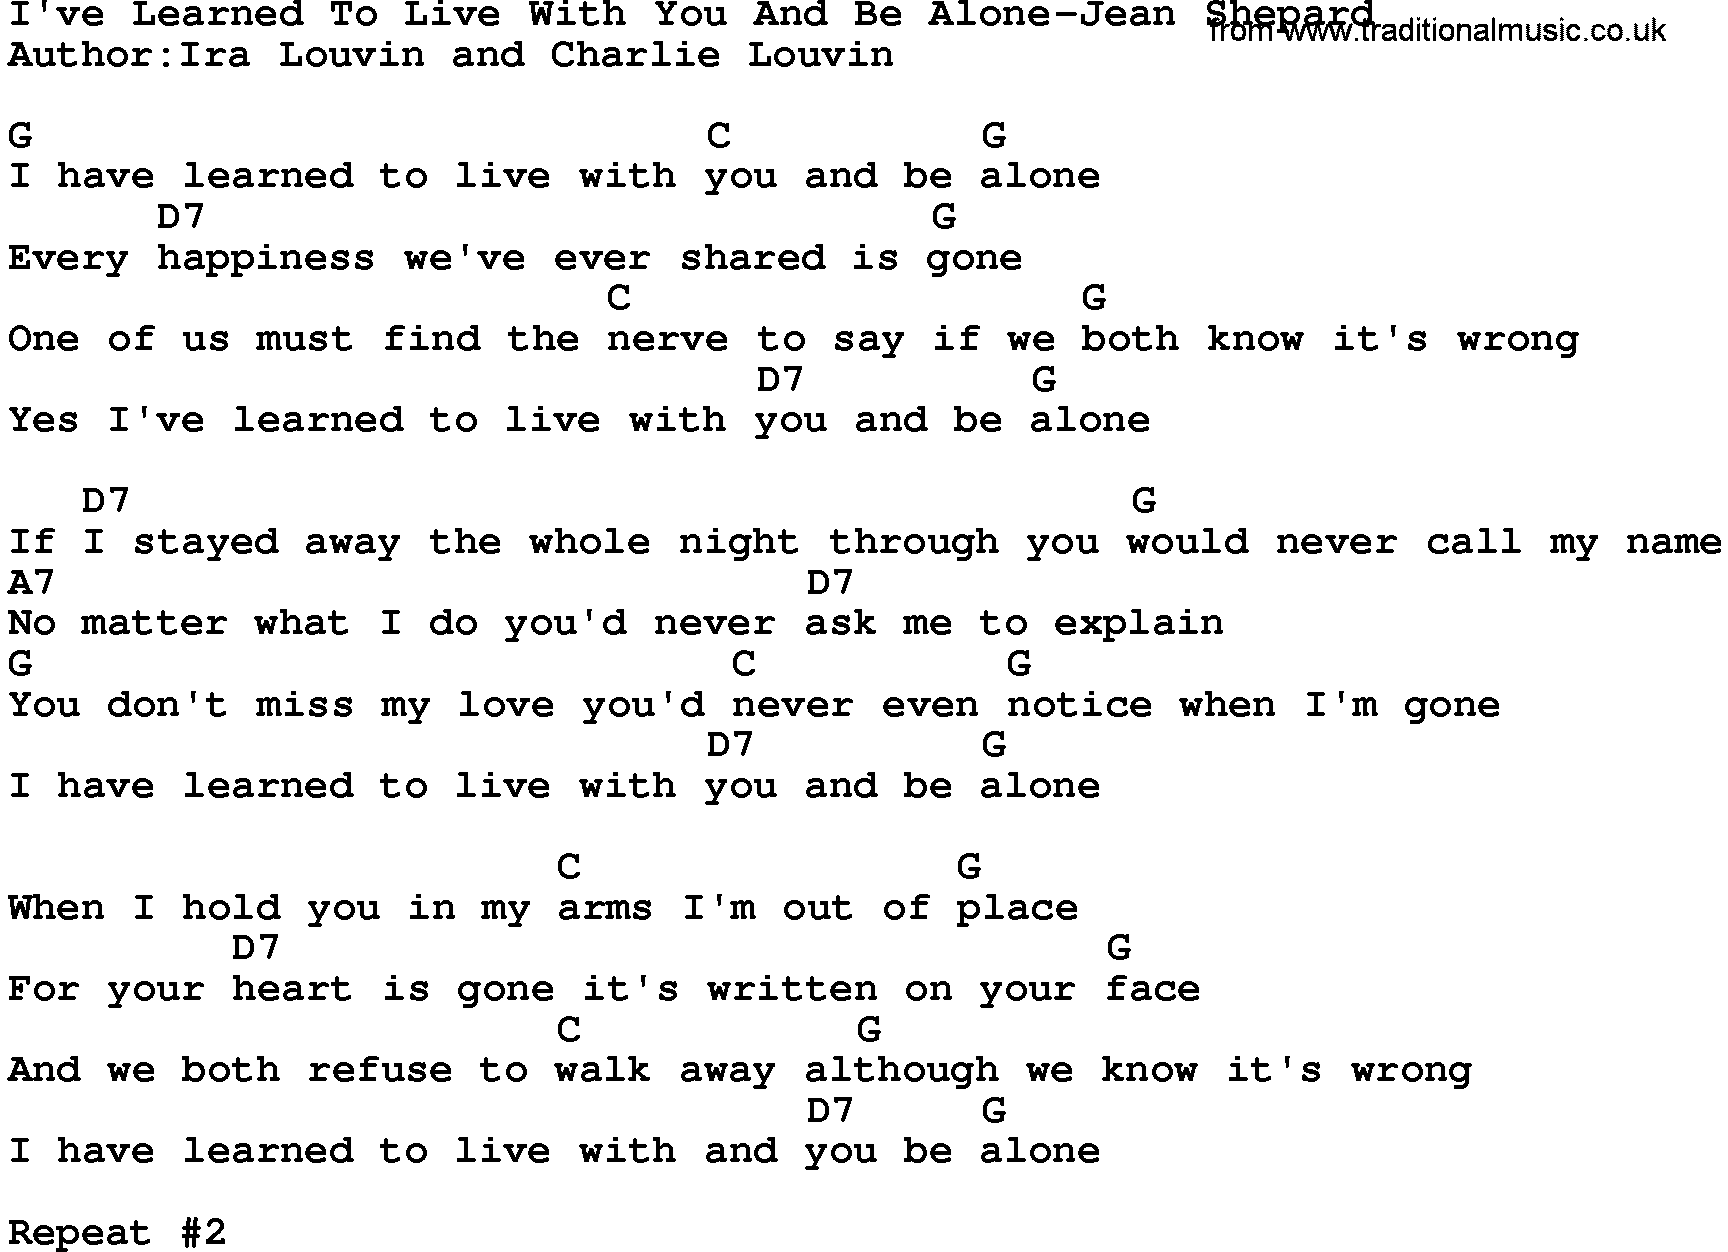 Country music song: I've Learned To Live With You And Be Alone-Jean Shepard lyrics and chords